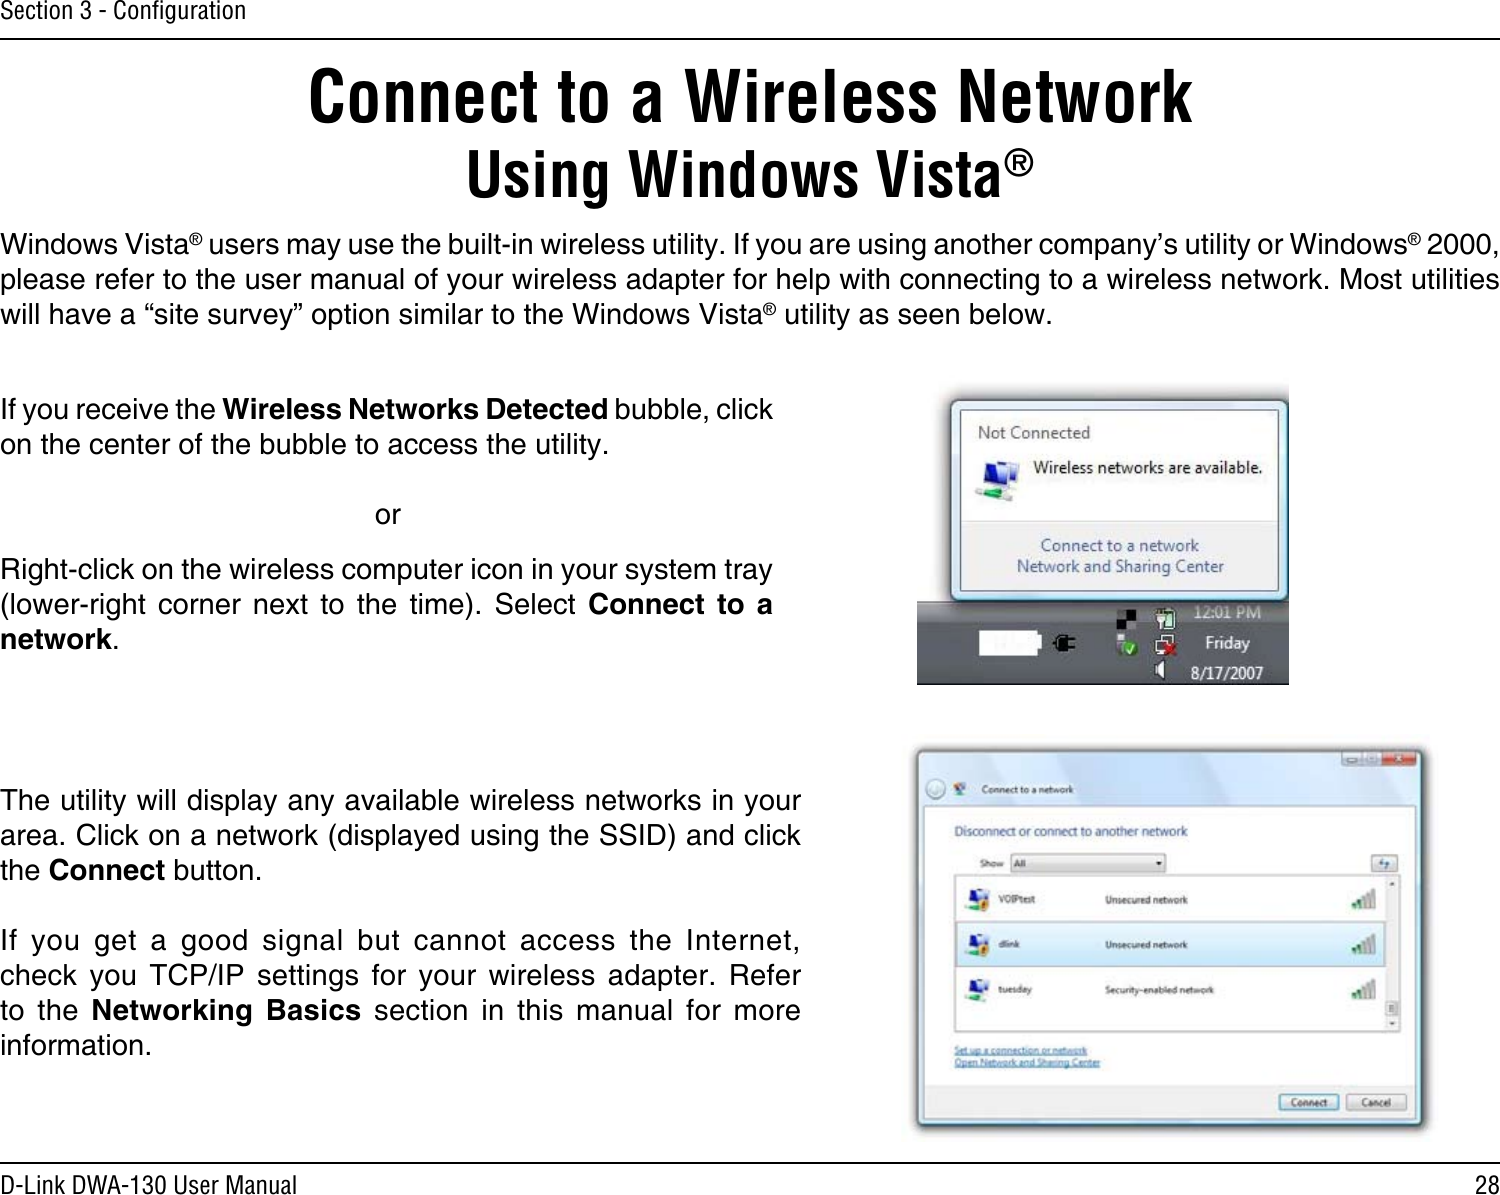 28D-Link DWA-130 User ManualSection 3 - ConﬁgurationConnect to a Wireless NetworkUsing Windows Vista®Windows Vista® users may use the built-in wireless utility. If you are using another company’s utility or Windows® 2000, please refer to the user manual of your wireless adapter for help with connecting to a wireless network. Most utilities will have a “site survey” option similar to the Windows Vista® utility as seen below.Right-click on the wireless computer icon in your system tray (lower-right  corner  next  to  the  time).  Select  Connect  to  a network.If you receive the Wireless Networks Detected bubble, click on the center of the bubble to access the utility.     orThe utility will display any available wireless networks in your area. Click on a network (displayed using the SSID) and click the Connect button.If  you  get  a  good  signal  but  cannot  access  the  Internet, check  you  TCP/IP  settings  for  your  wireless  adapter.  Refer to  the  Networking  Basics  section  in  this  manual  for  more information.